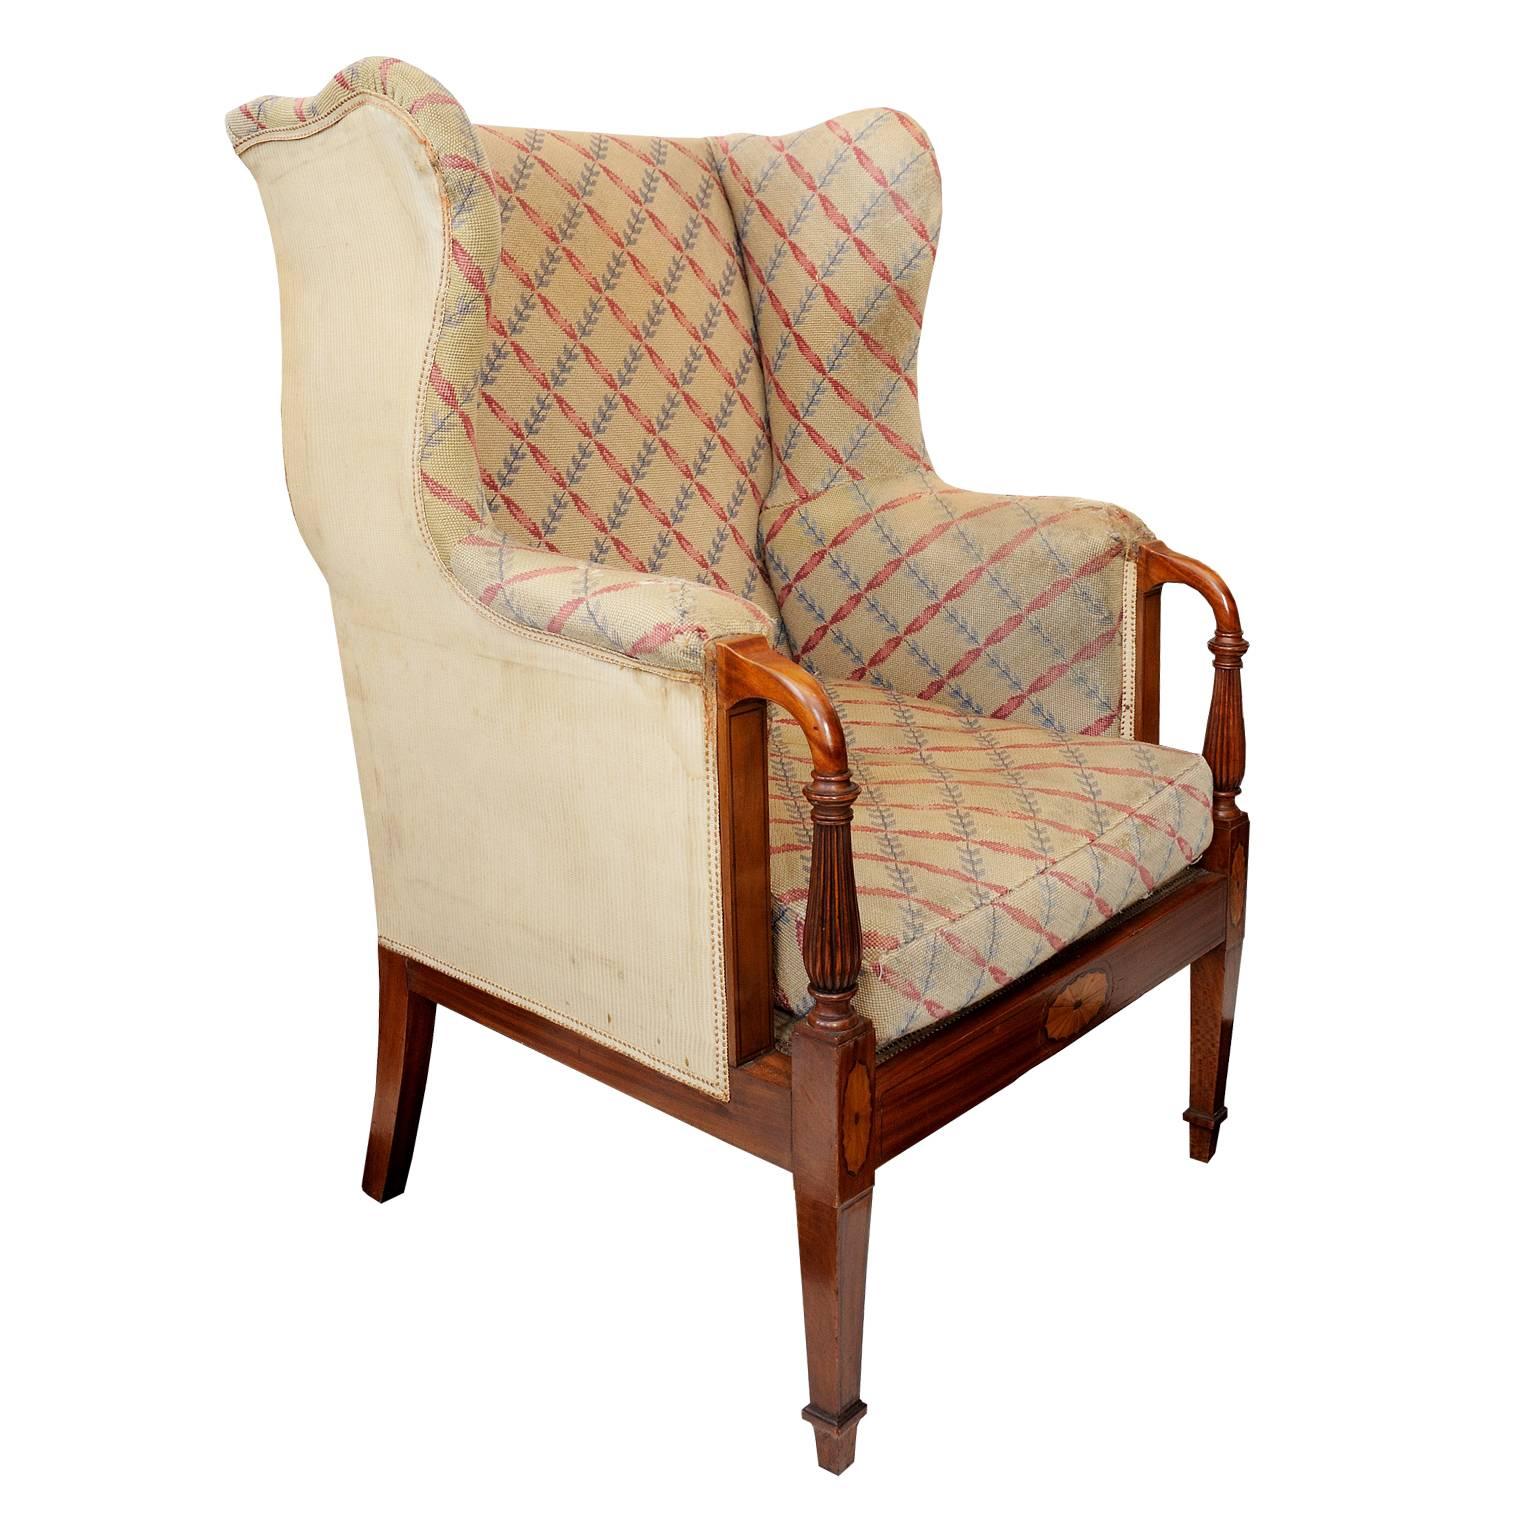 This is a superb and rare pair of late 19th century English Country House solid satinwood wing chairs, retaining their original needle point fabric covering, circa 1890.

Made by the famous English furniture company "Waring & Gillow"